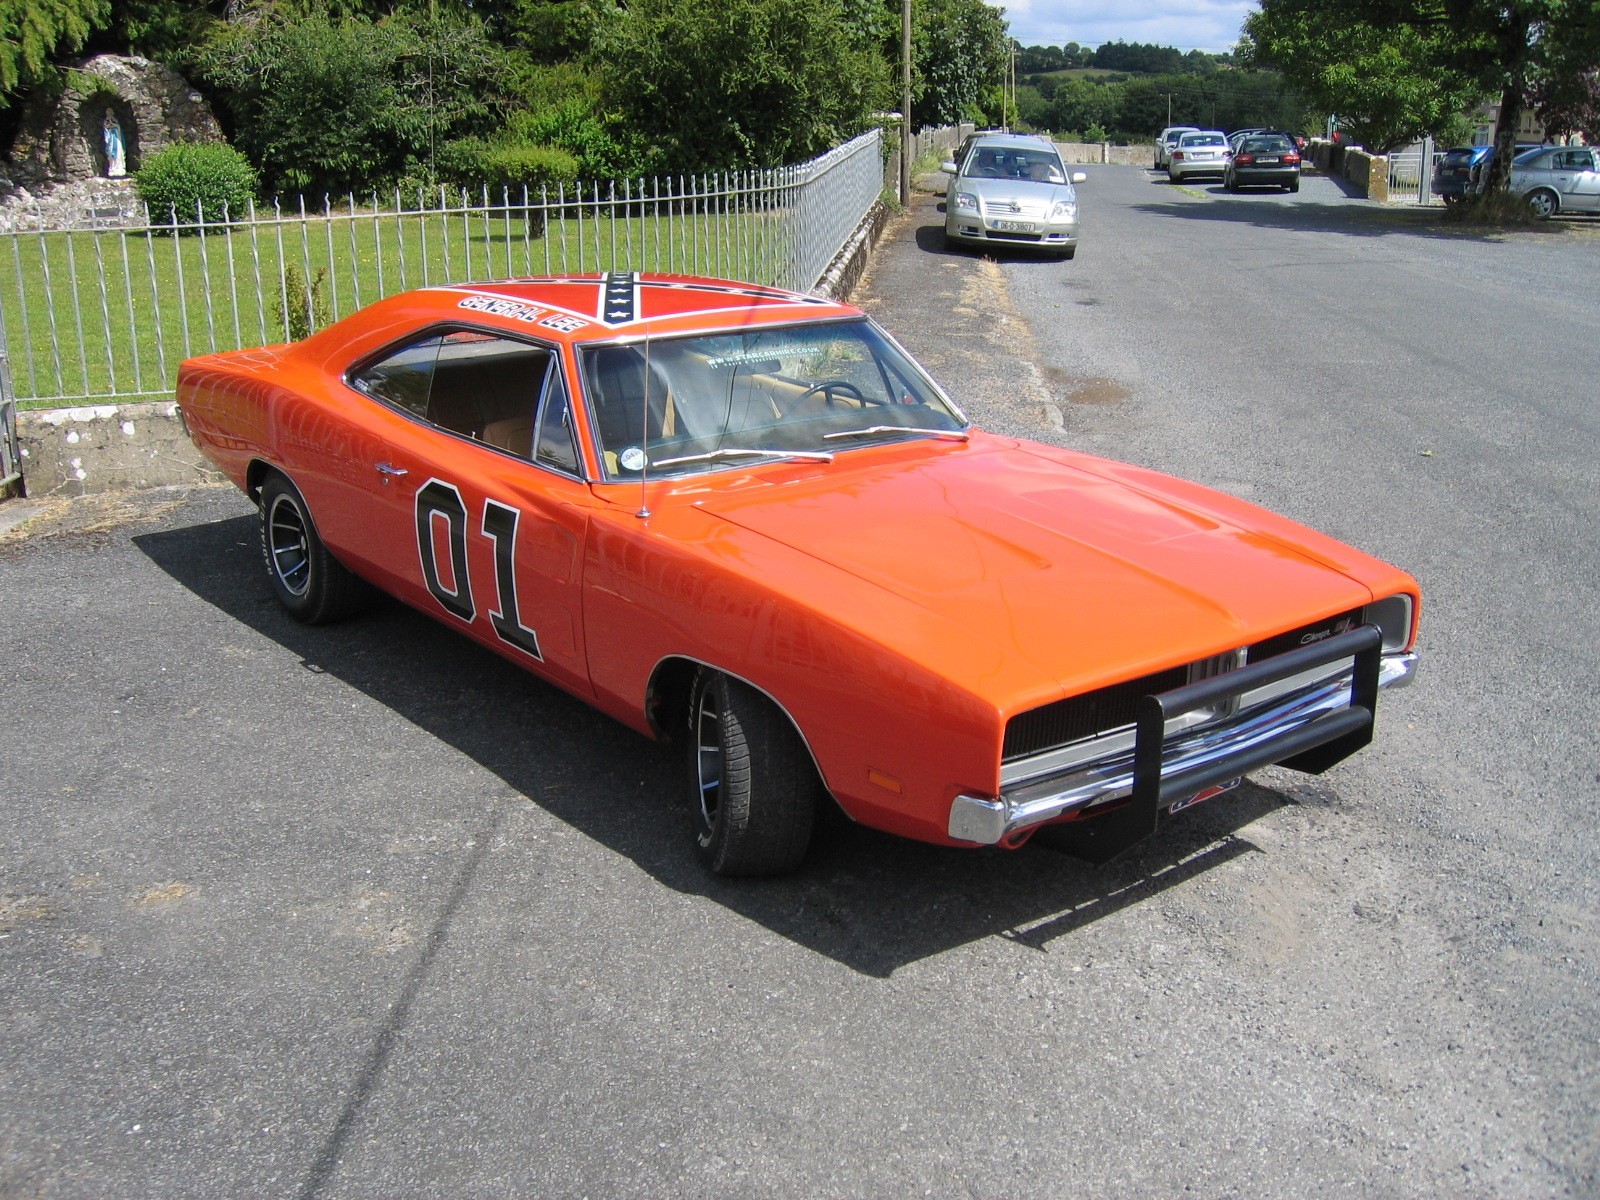 General 1600x1200 car Dodge Charger General Lee Dodge vehicle orange cars muscle cars American cars